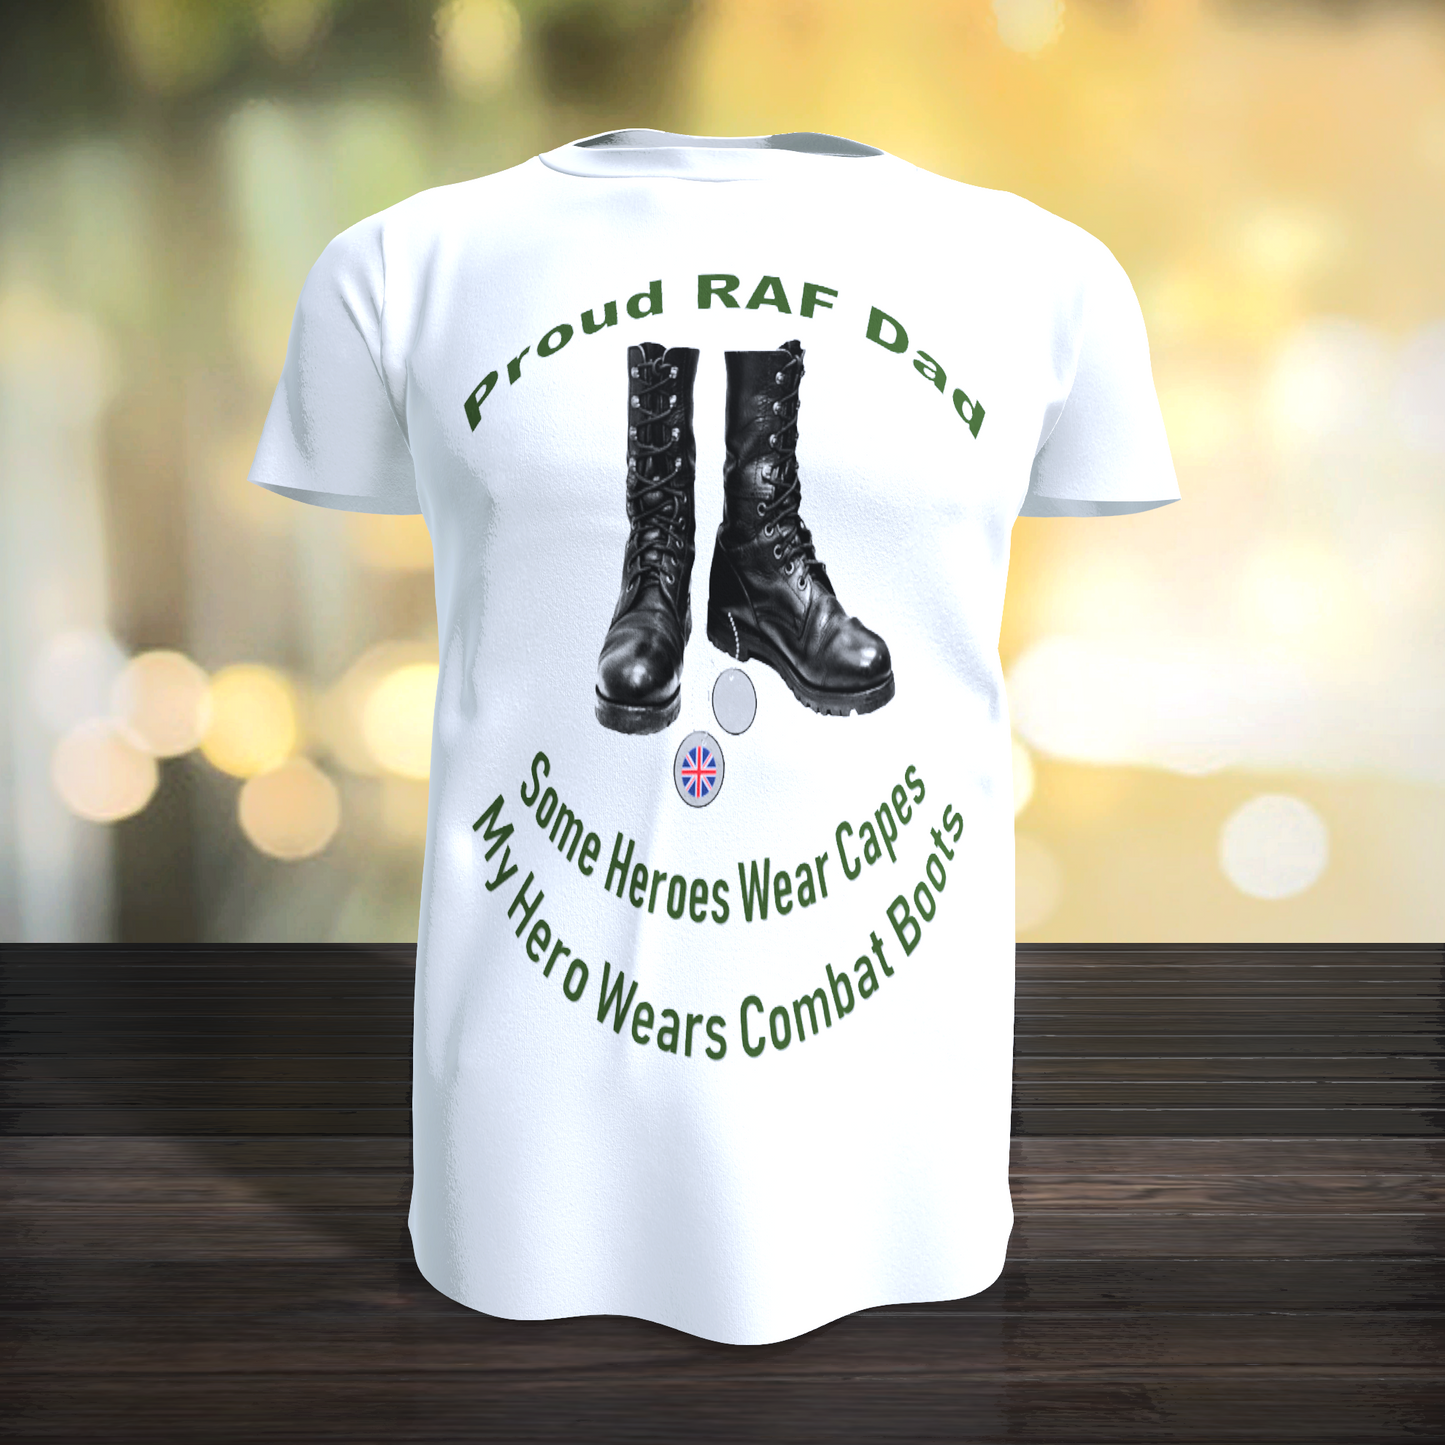 Bear Essentials Clothing Proud RAF Mum or Dad and Sister T-Shirt - Army 1157 kit White / XL / Dad Army 1157 Kit Veterans Owned Business